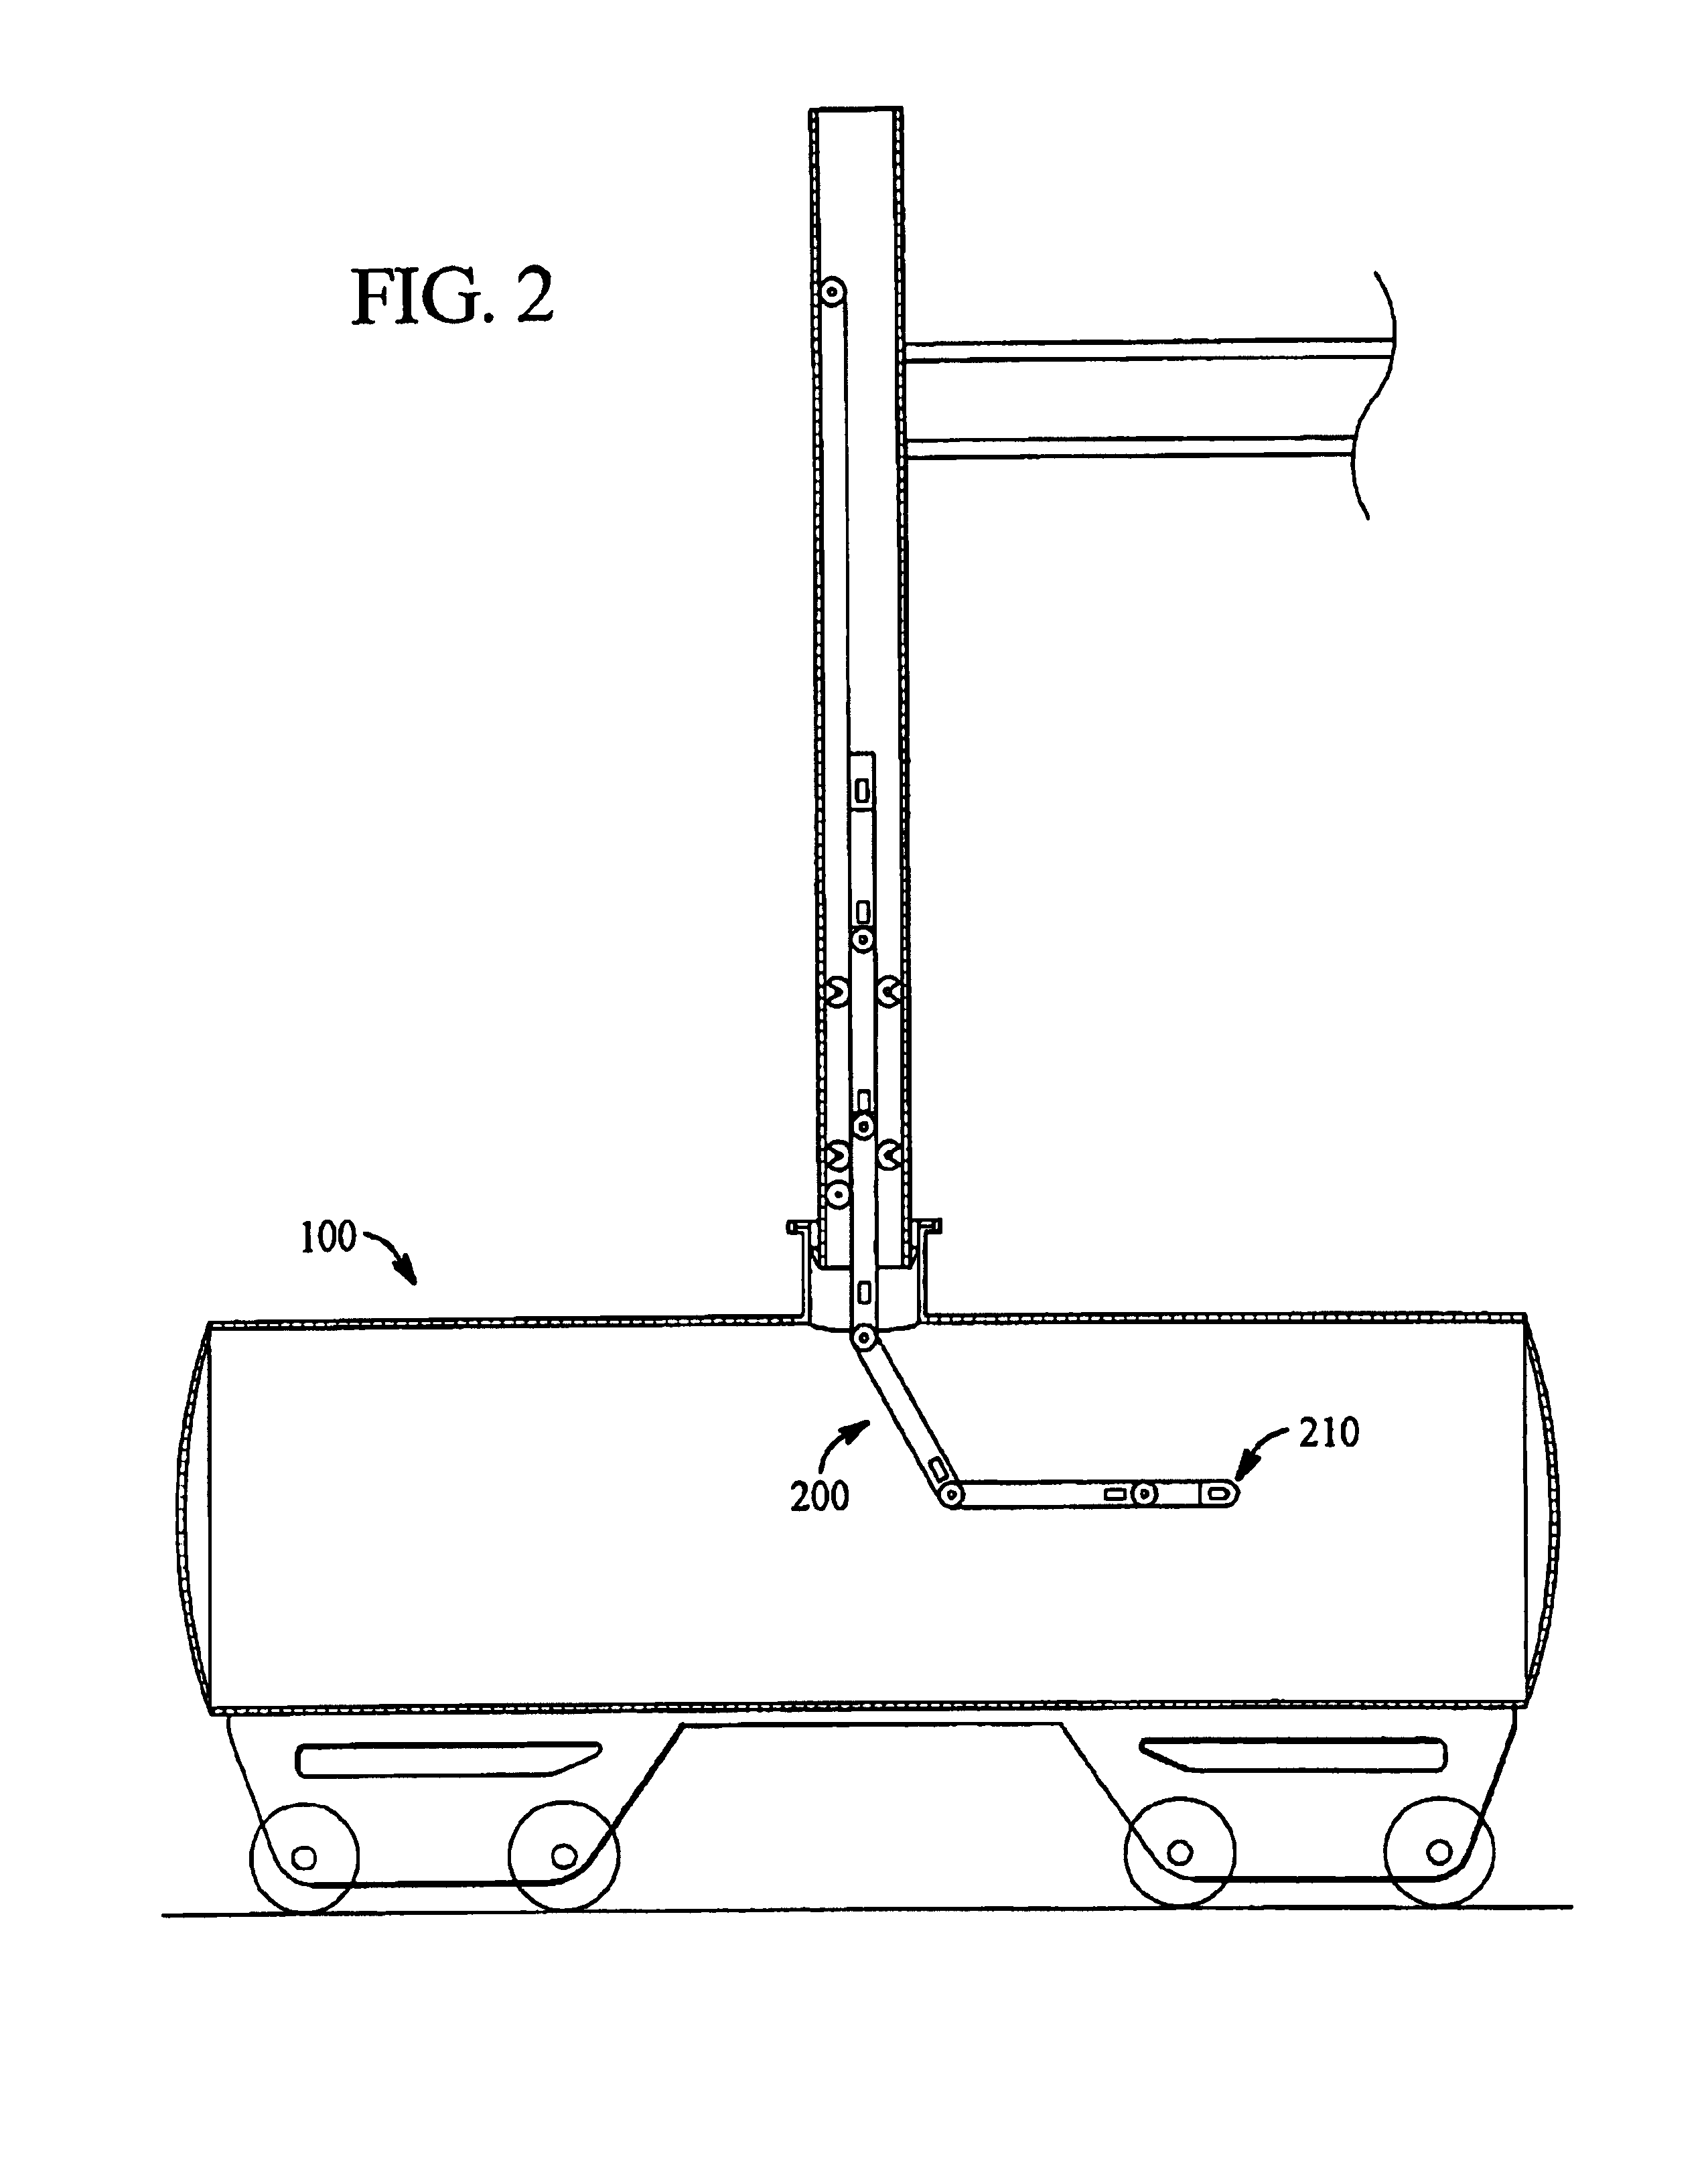 Method and arrangement for inspection and requalification of vehicles used for transporting commodities and/or hazardous materials